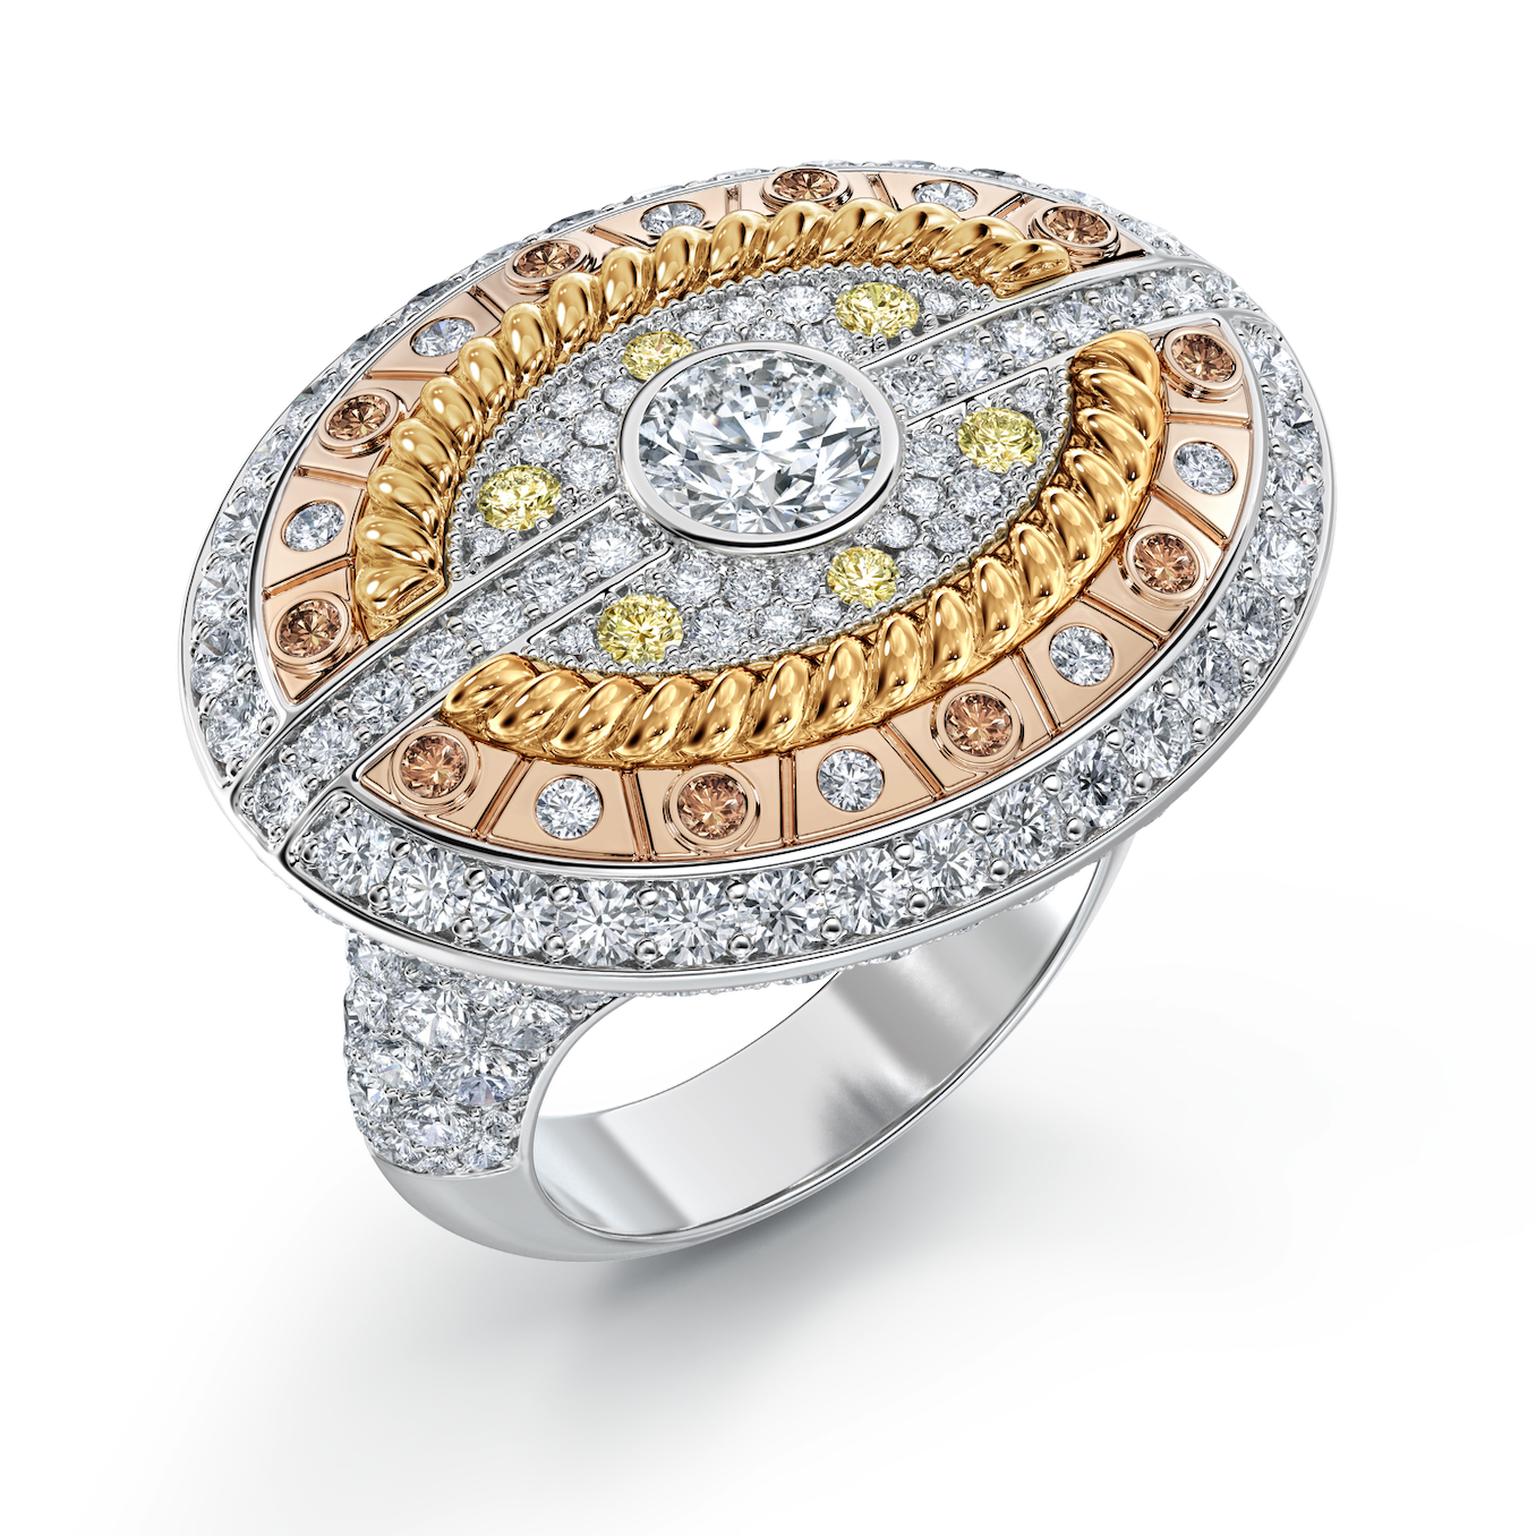 Prelude cocktail ring by De Beers